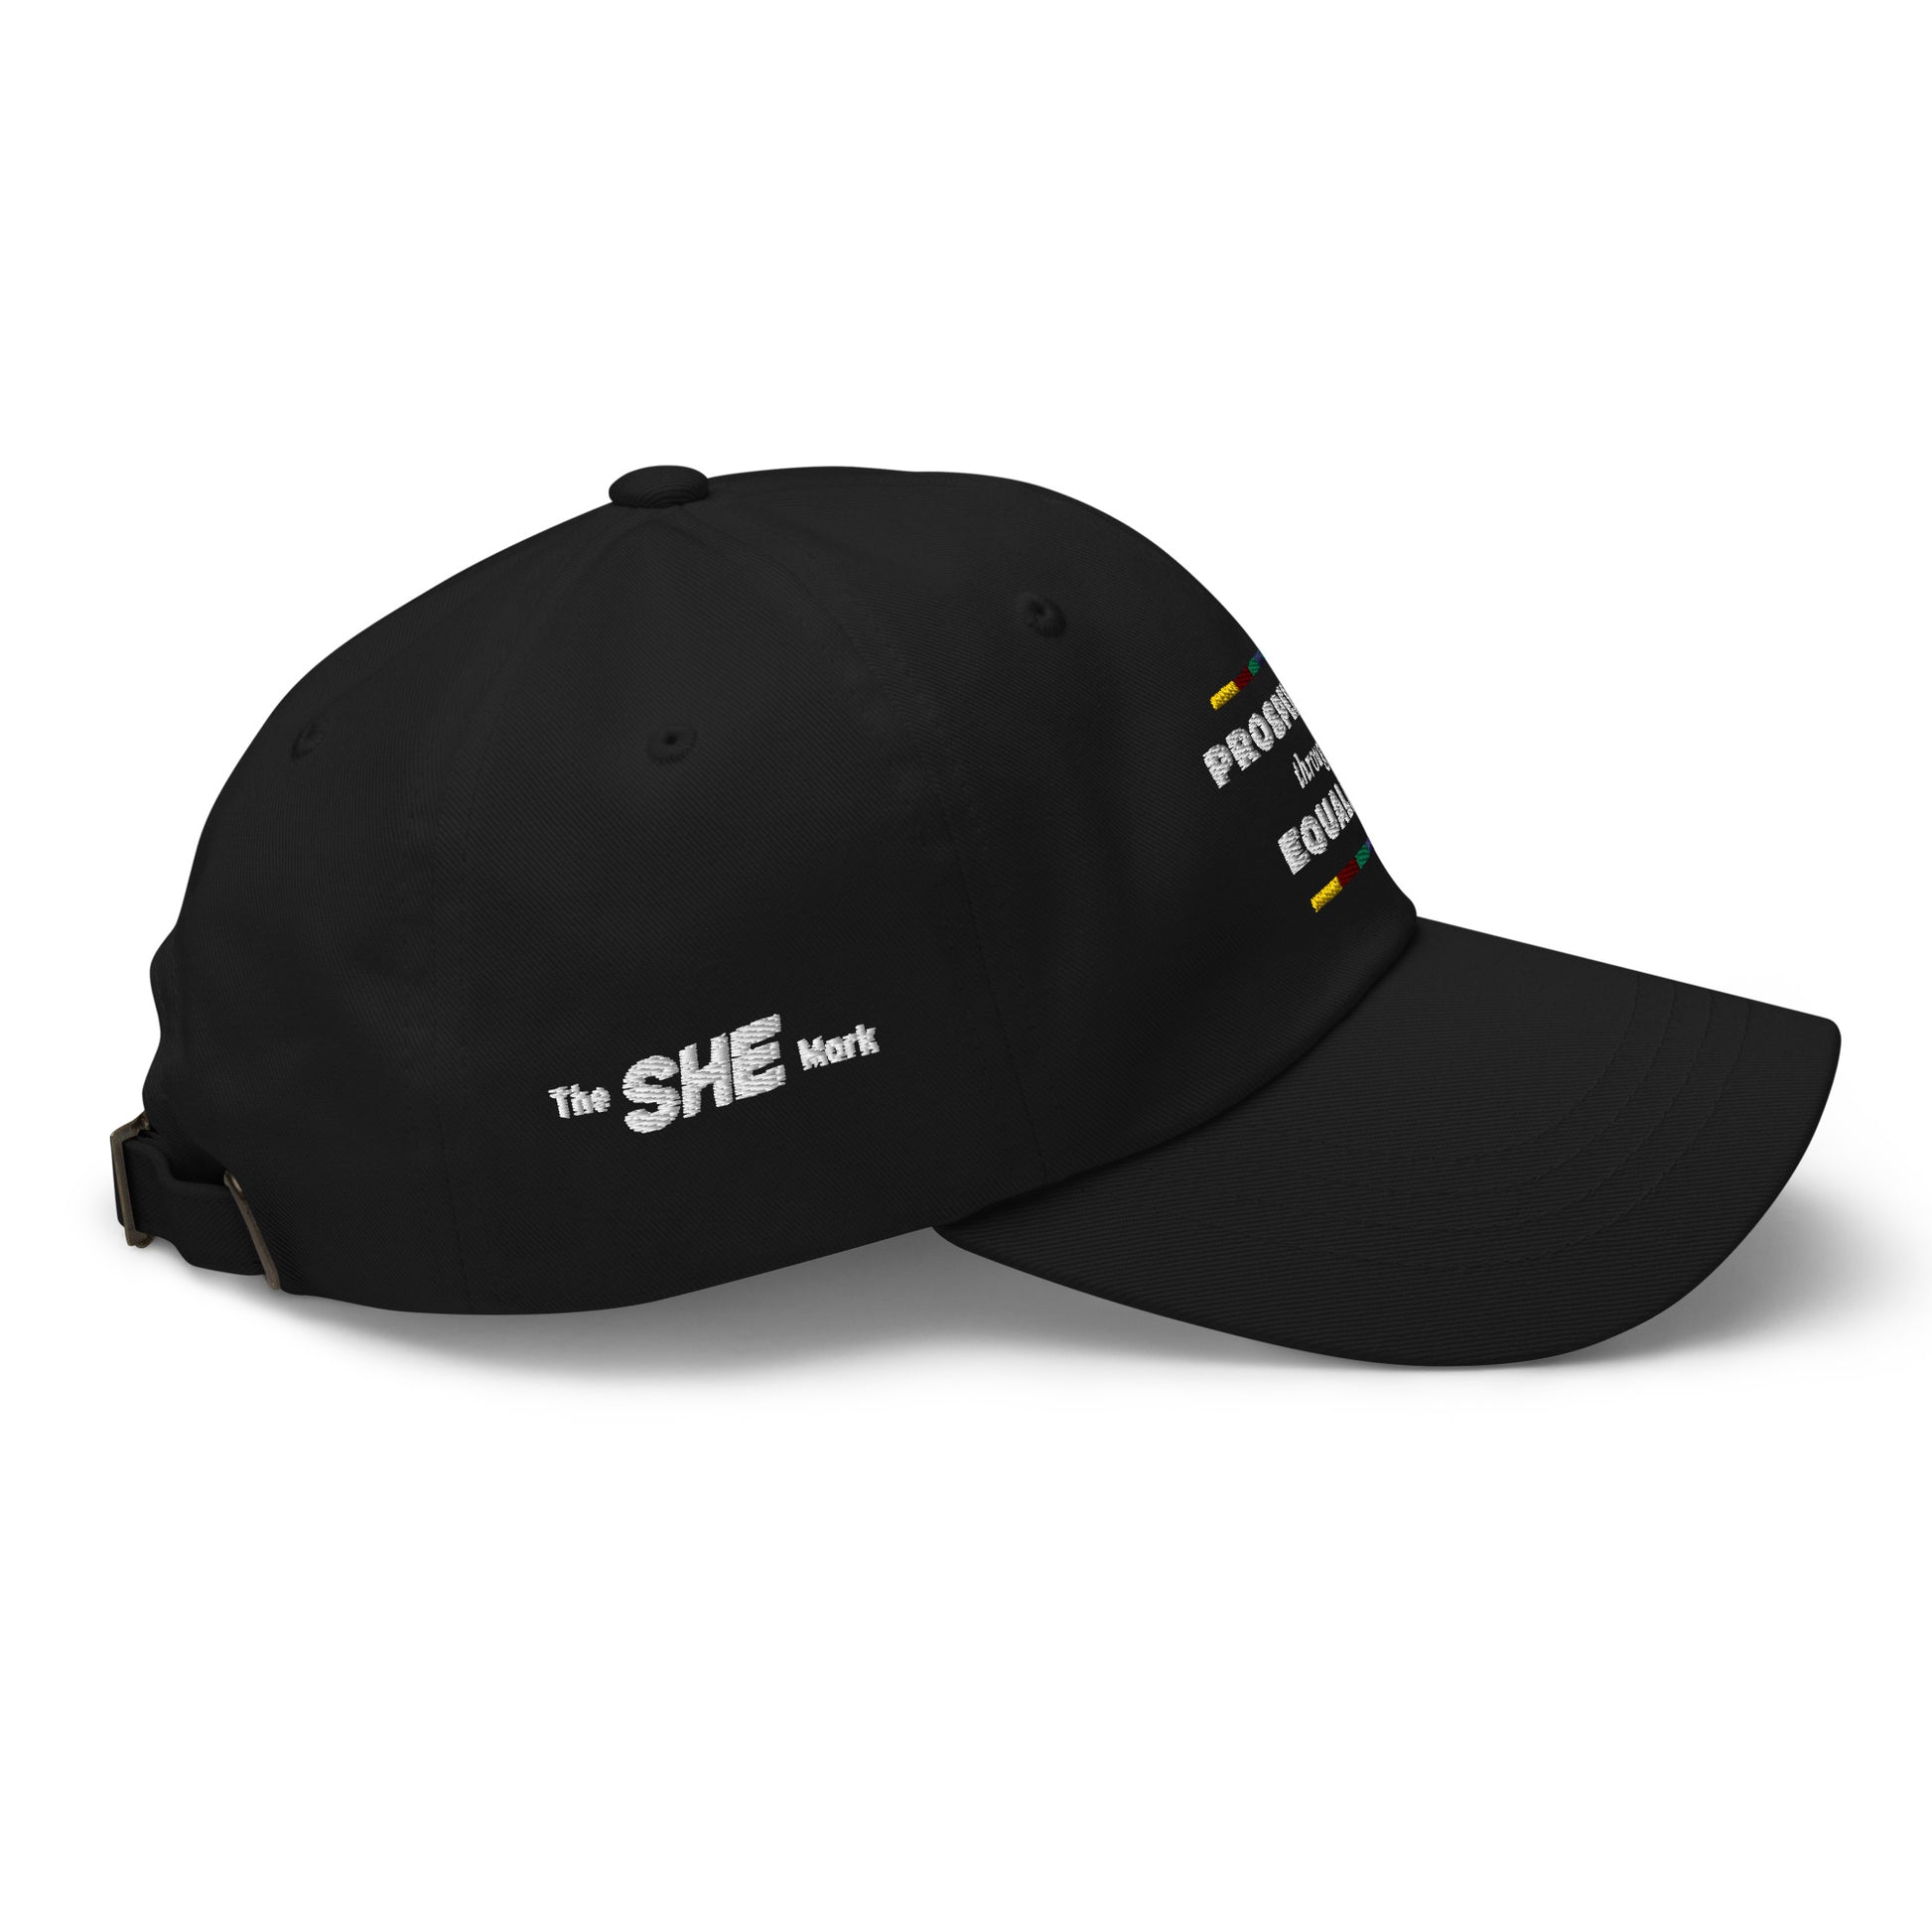 On the right side of the hat is embroidered in white "The SHE Mark."